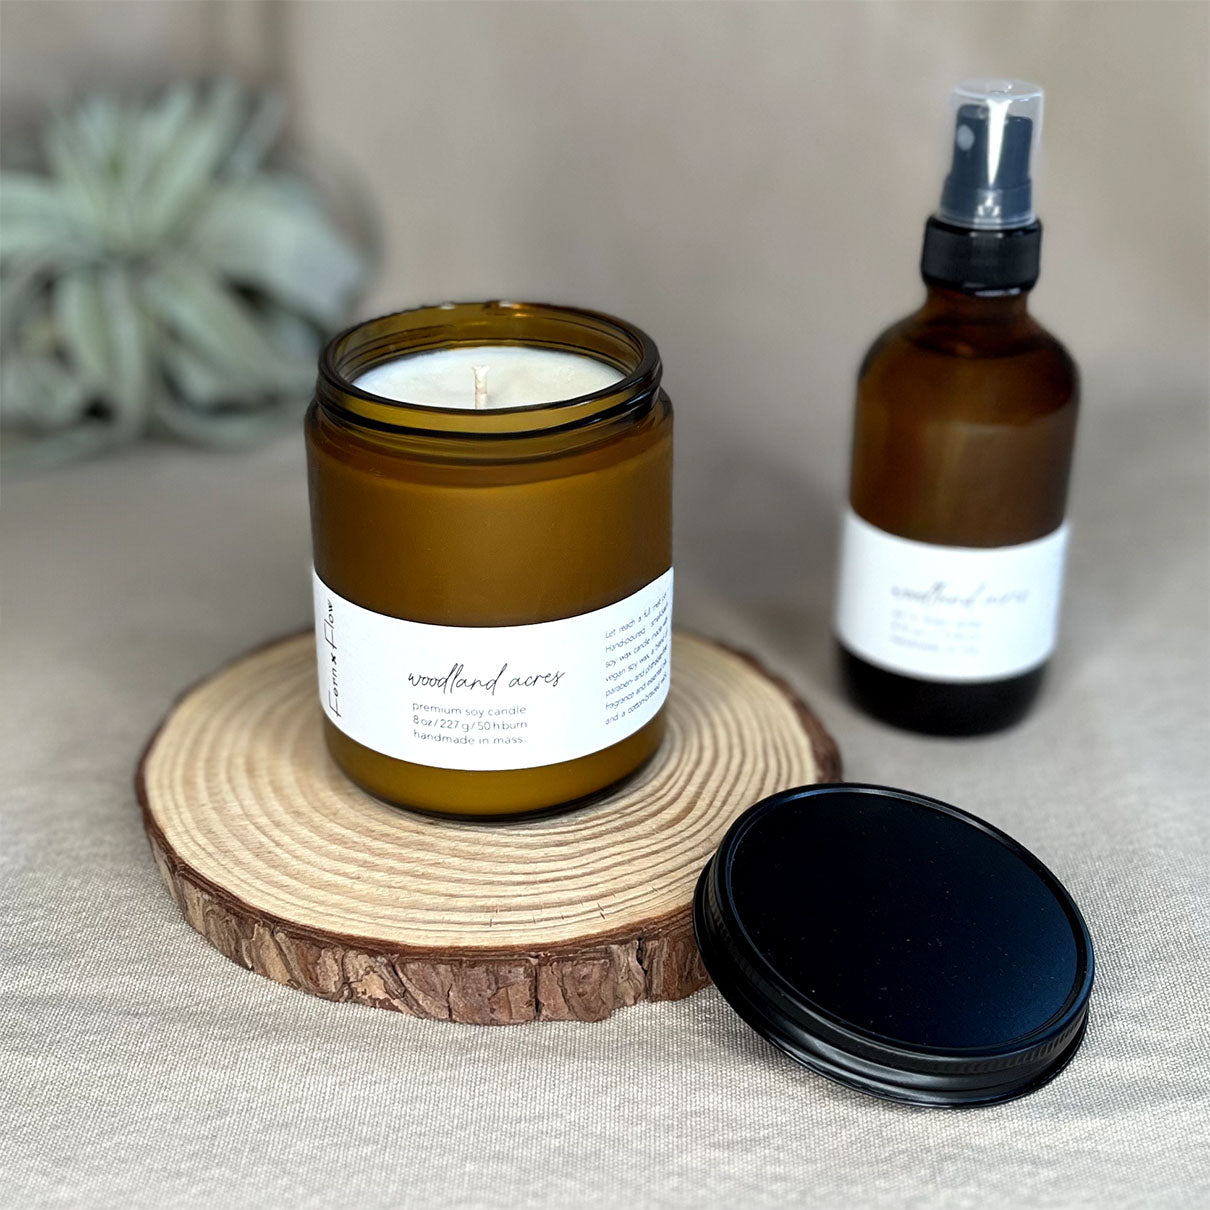 Fern x Flow Woodland Acres vegan soy candle and air + linen spray fragrance bundle on a rustic wooden riser.